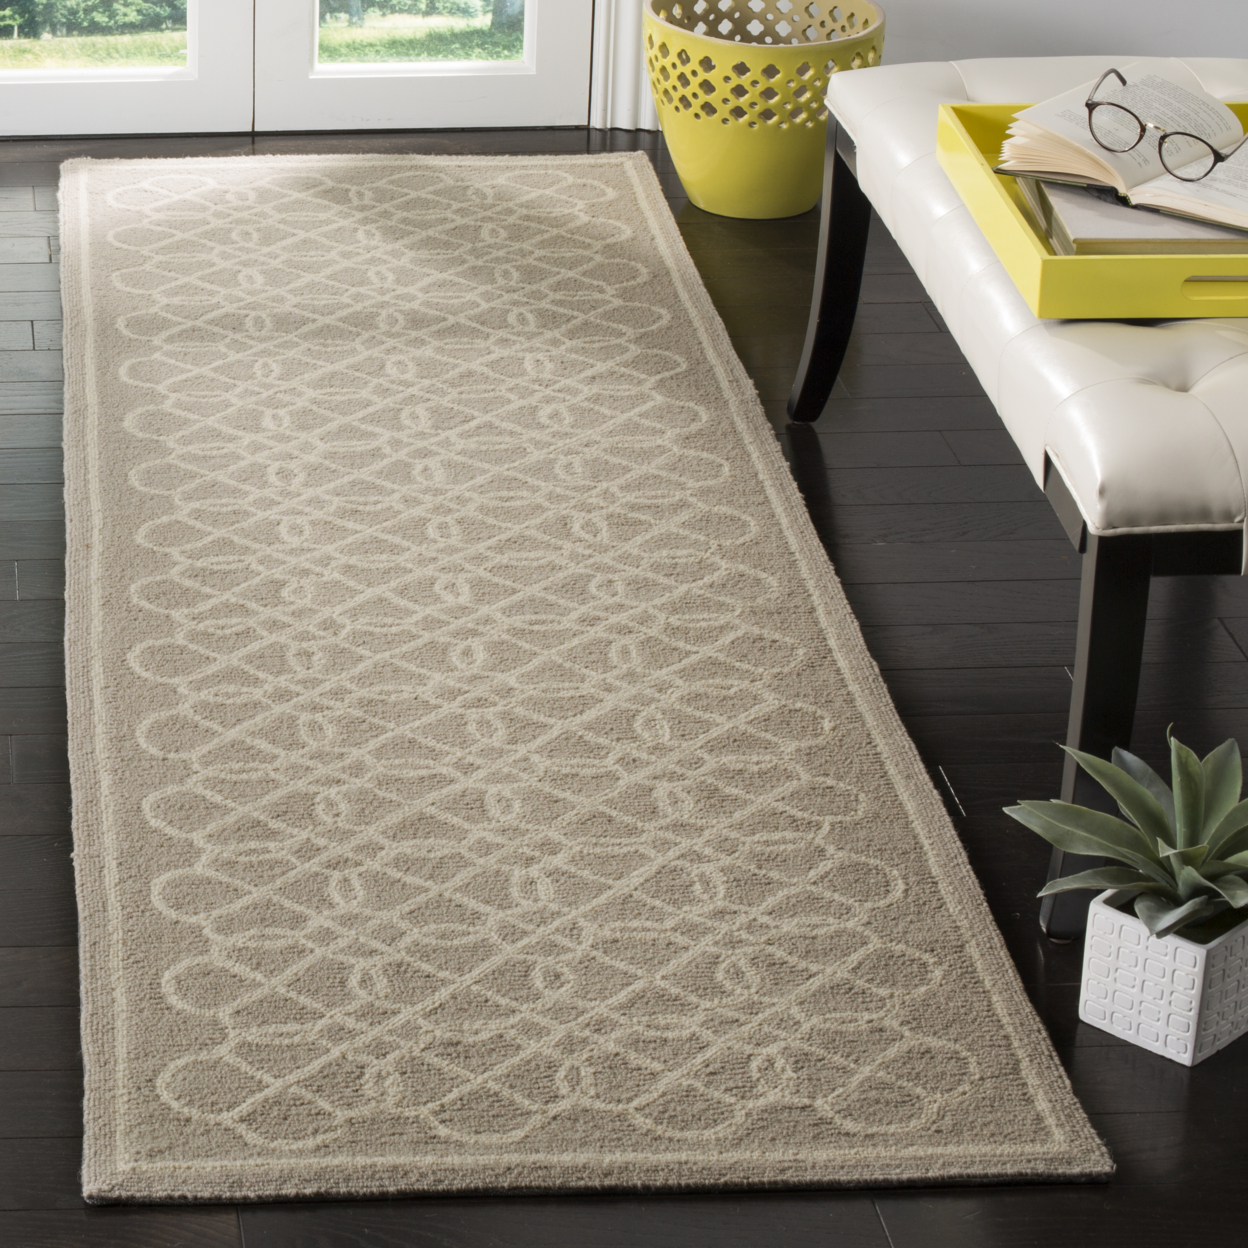 SAFAVIEH Chelsea HK739A Hand-hooked Tan / Ivory Rug - 8' Square